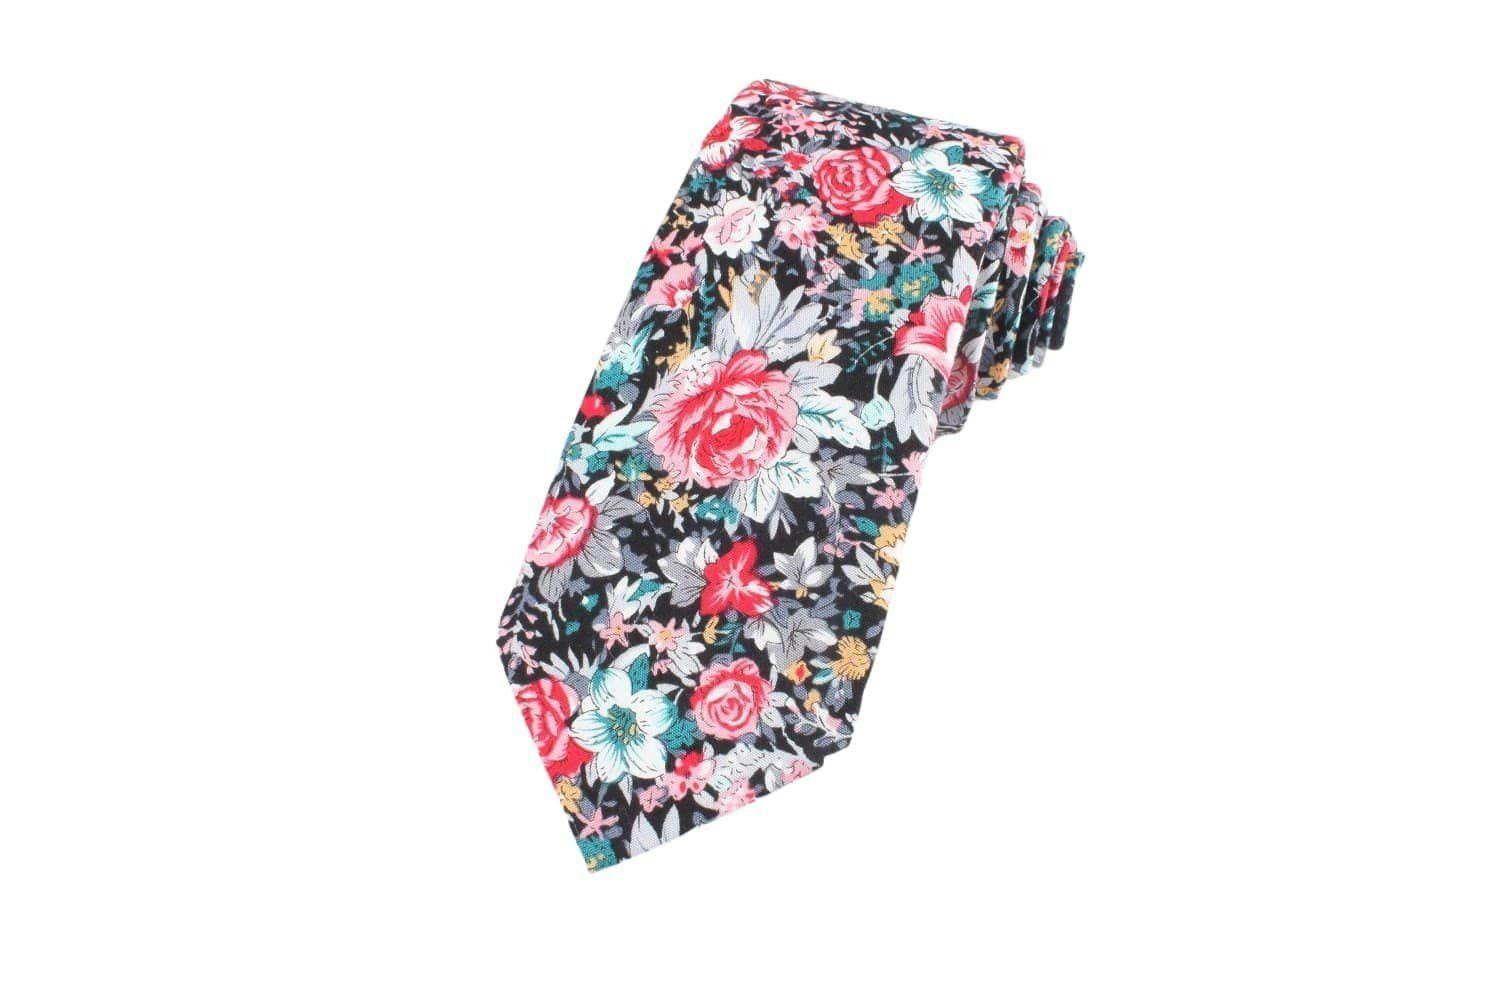 ISAAC Floral Skinny Tie 2.36&quot;-Neckties-ISAAC Floral Skinny Tie Men’s Floral Necktie for weddings and events, great for prom and anniversary gifts. Mens floral ties near me-Mytieshop. Skinny ties for weddings anniversaries. Father of bride. Groomsmen. Cool skinny neckties for men. Neckwear for prom, missions and fancy events. Gift ideas for men. Anniversaries ideas. Wedding aesthetics. Flower ties. Dry flower ties.